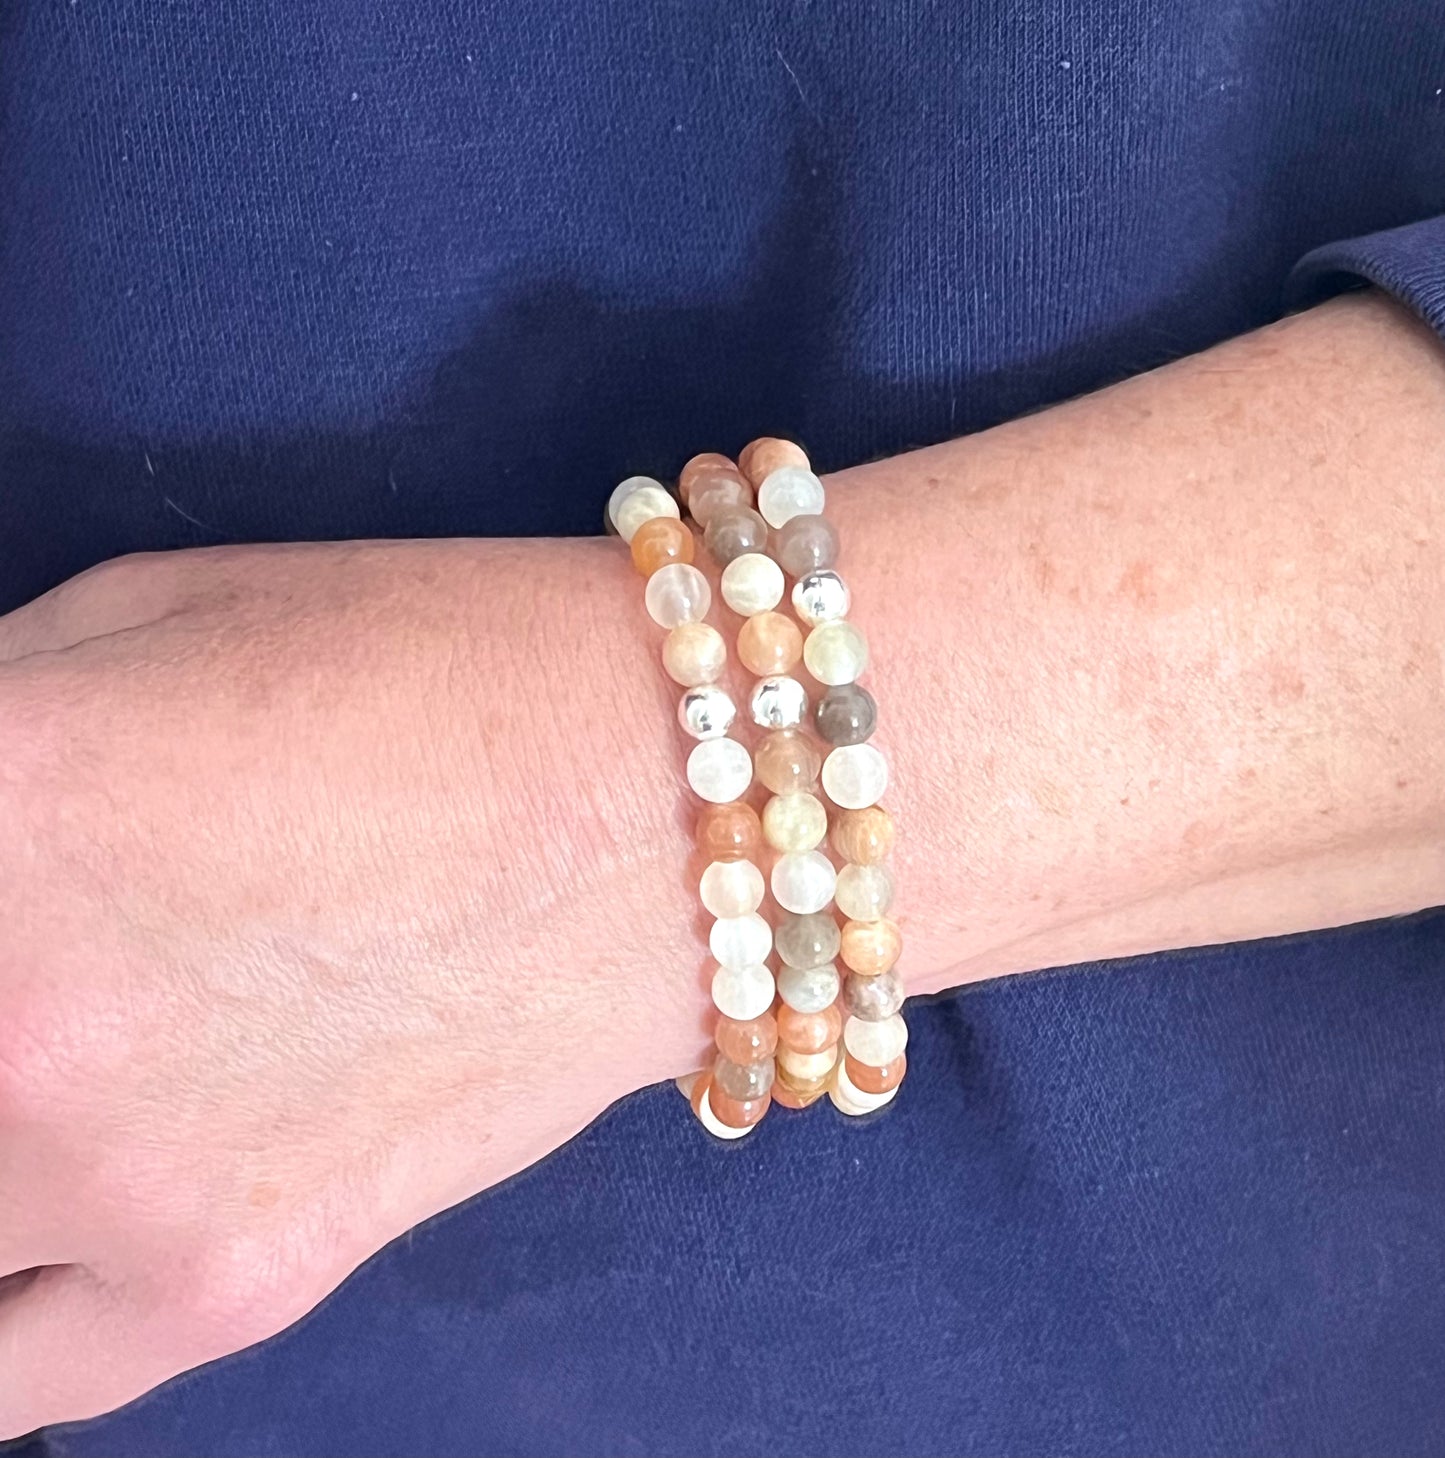 peach, grey and white moonstone stretch bracelet w/ one sterling silver connector bead